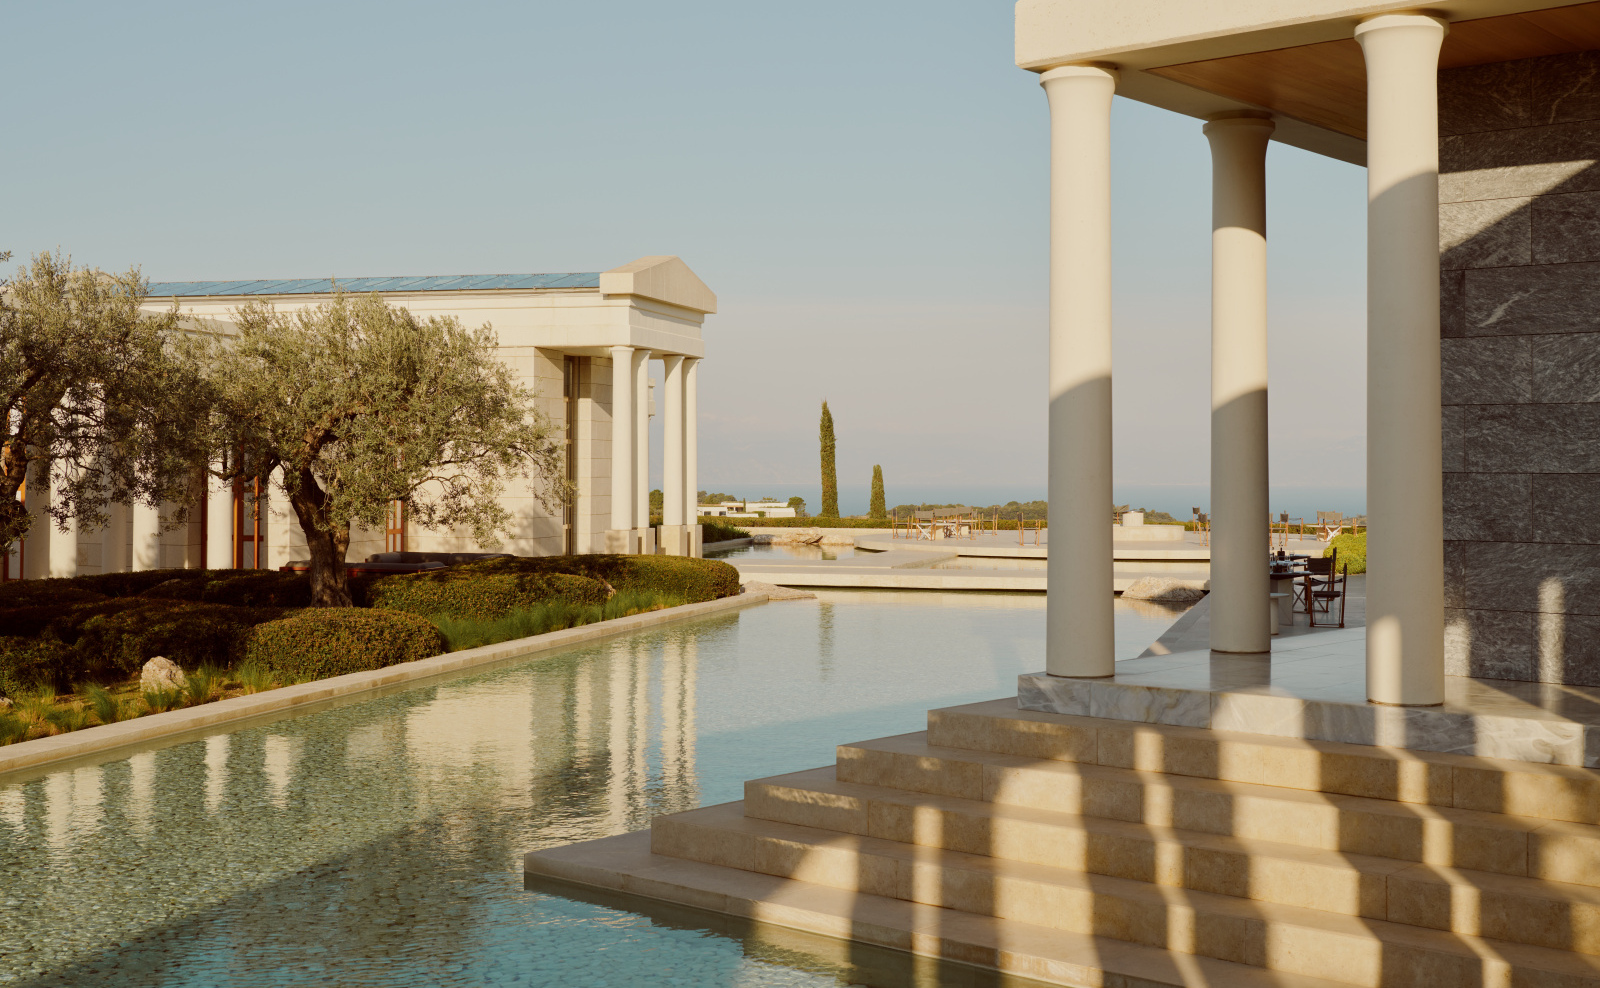 Amanzoe combines the best of ancient and modern Greece, making it a magical and timeless wedding venue